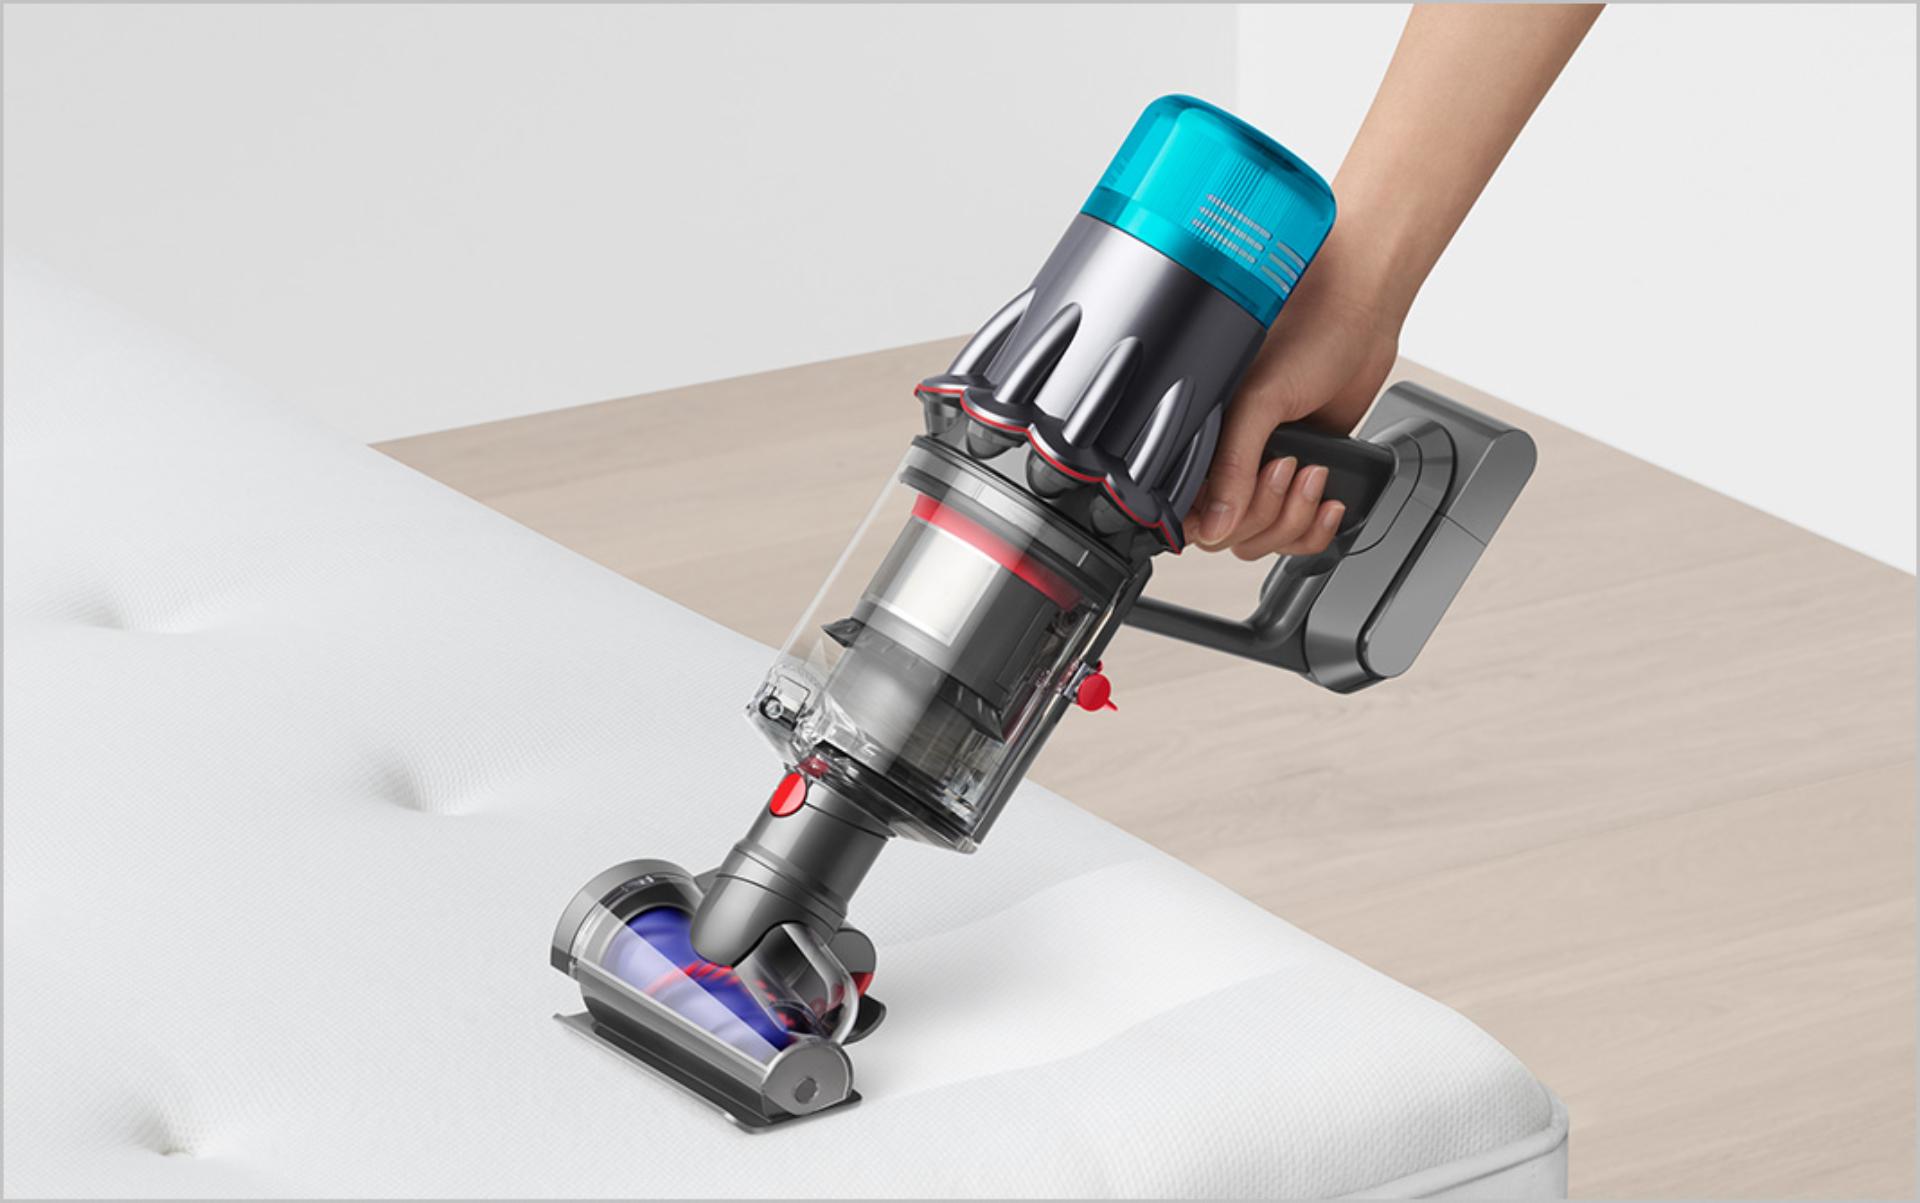 Picture of the mattress tool cleaning a futon.